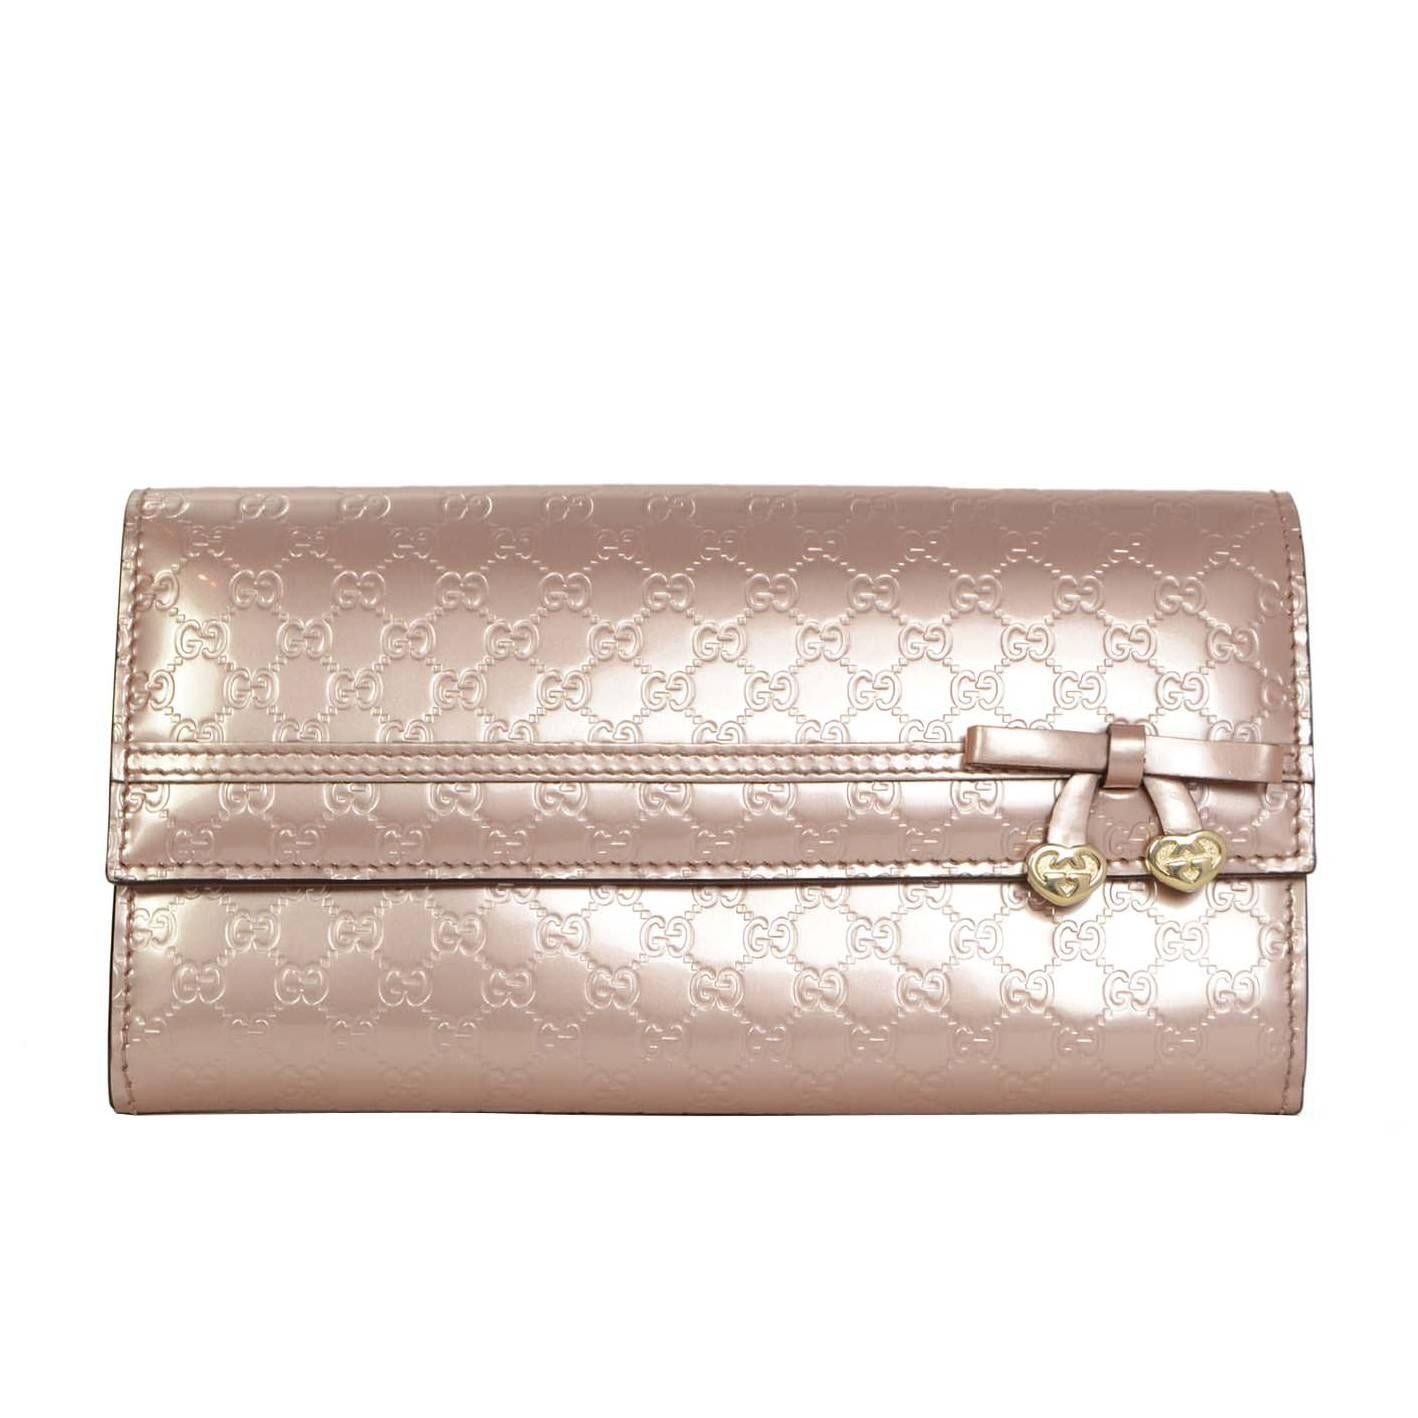 Gucci Champagne Pink Patent Leather Monogram Wallet rt. $580